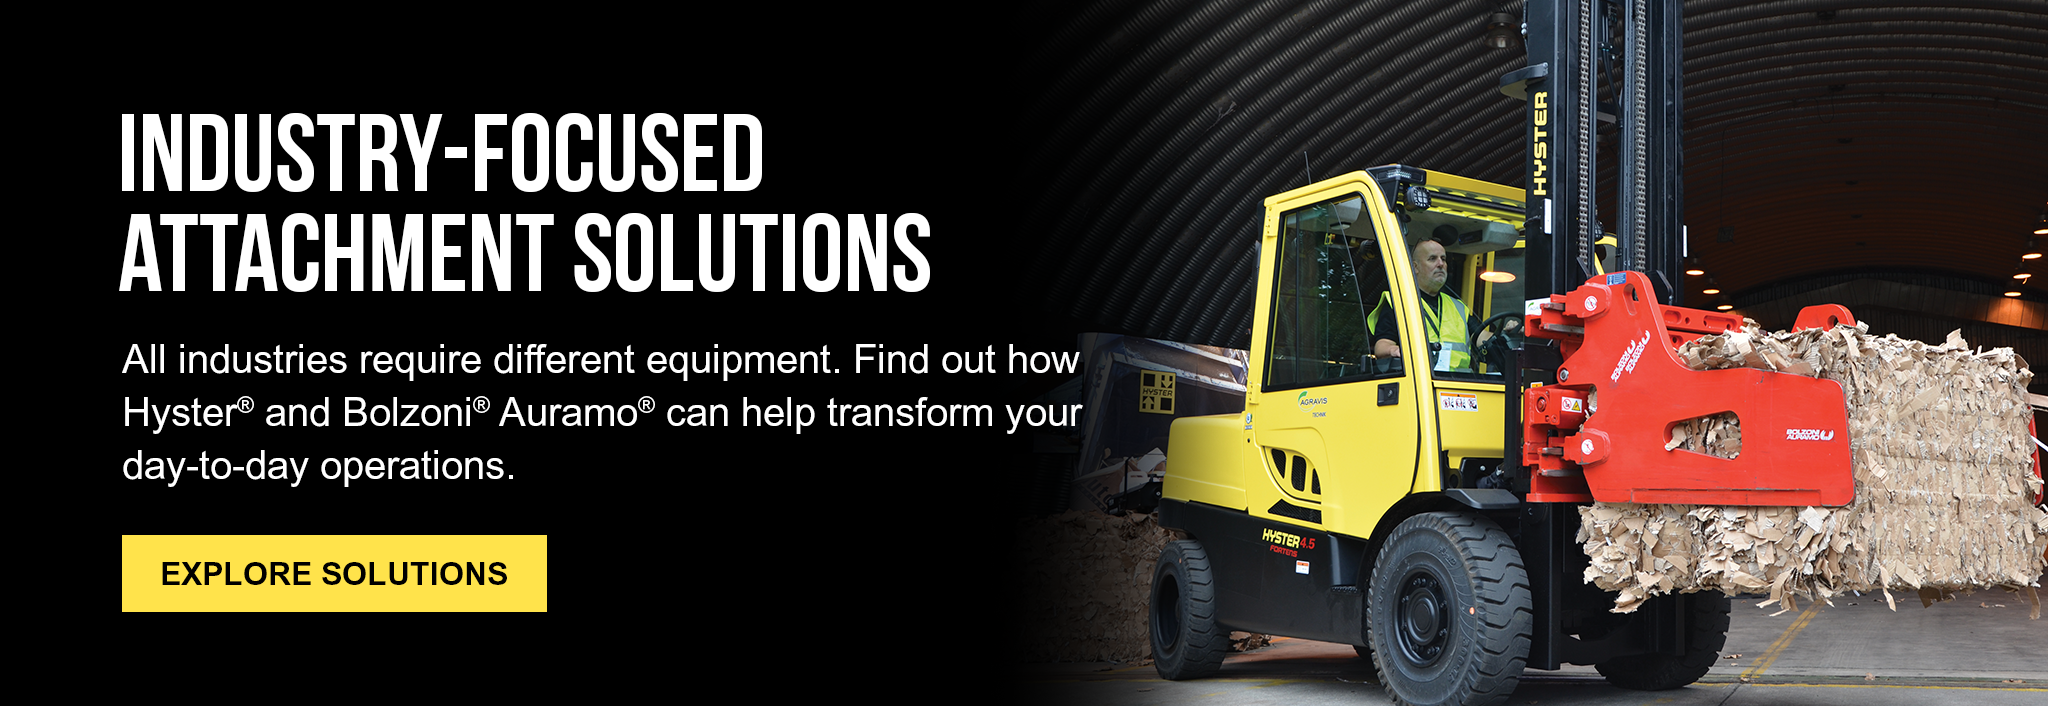 Hyster – Bolzoni Attachment Solutions Promo Banner